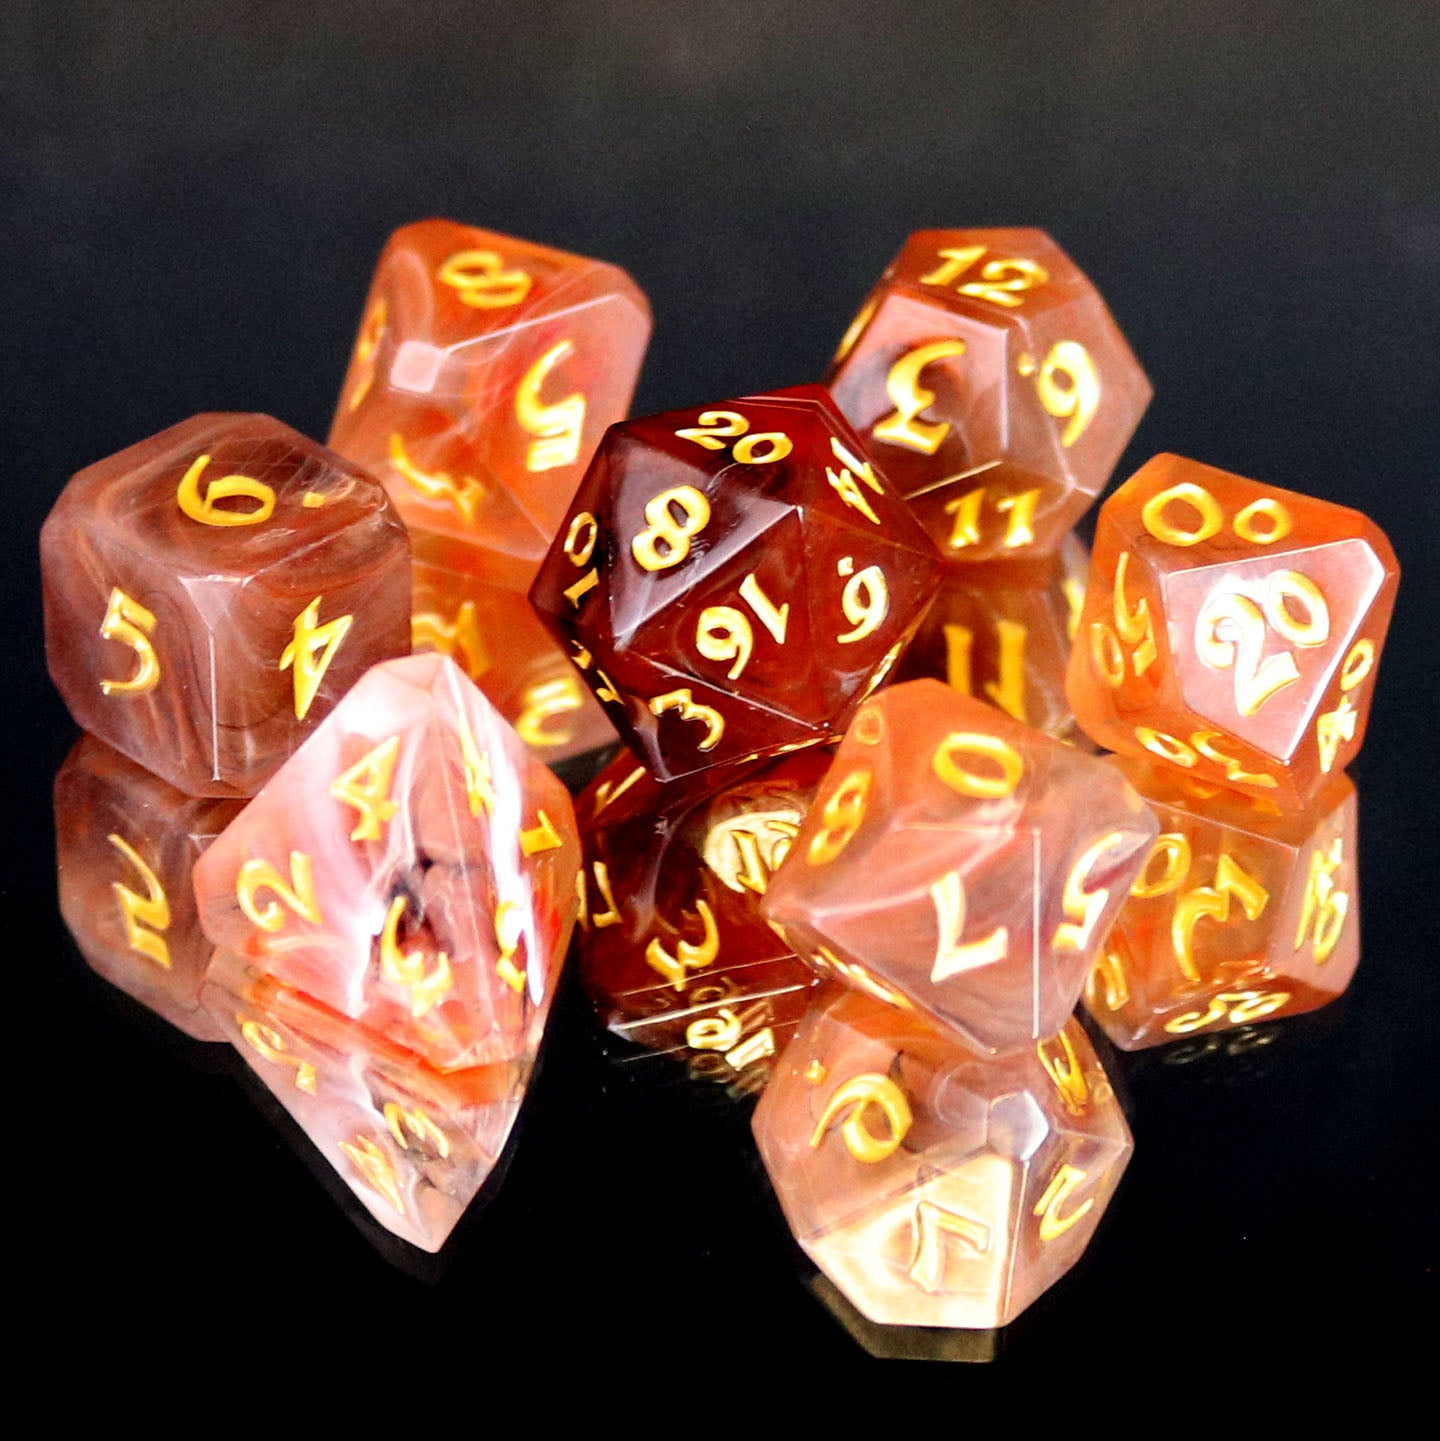 Roll The Dice For A More Profitable Event